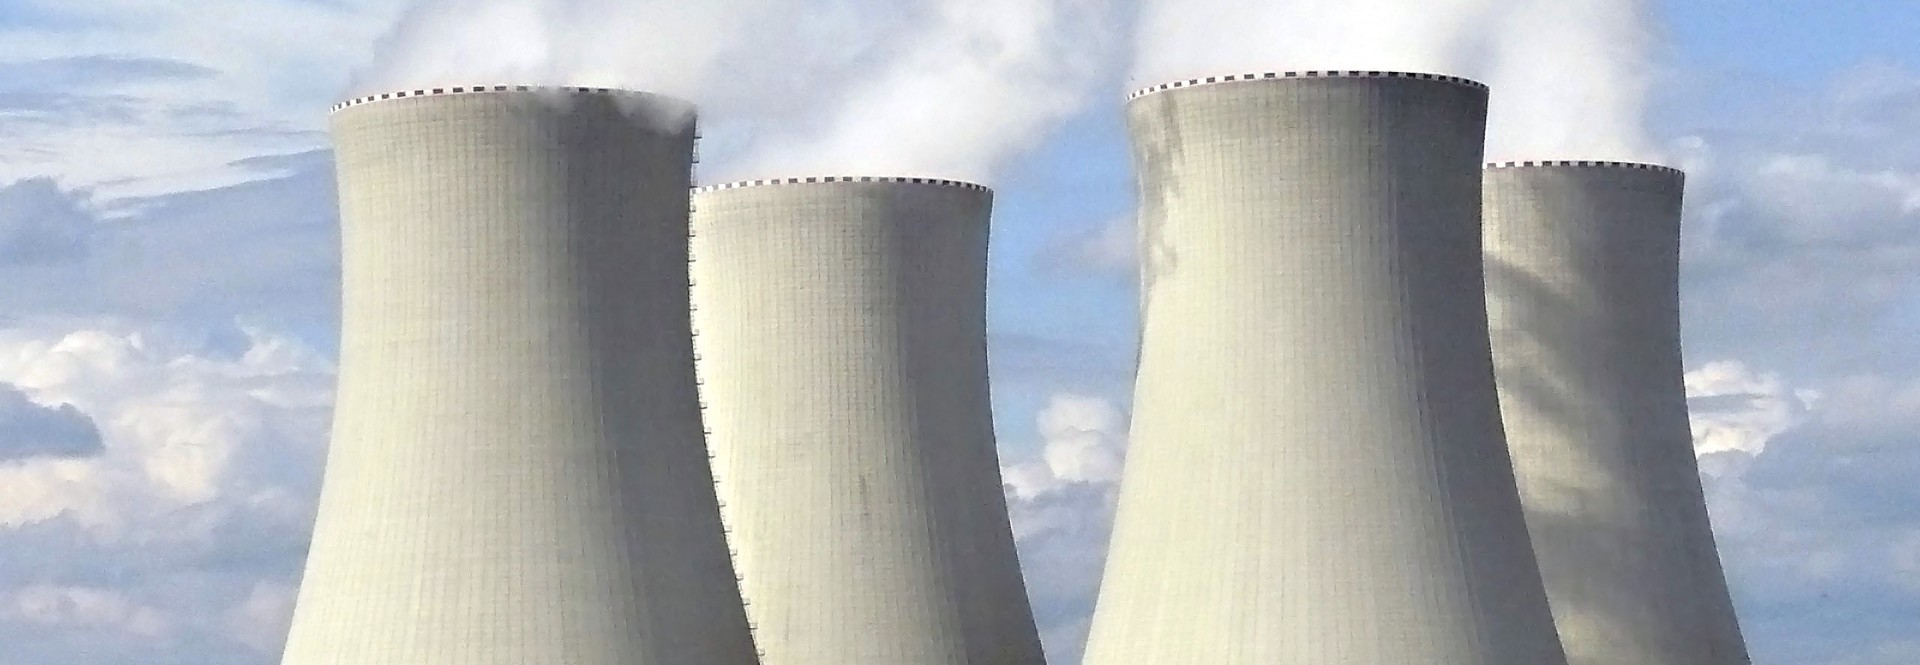 Nuclear power generation